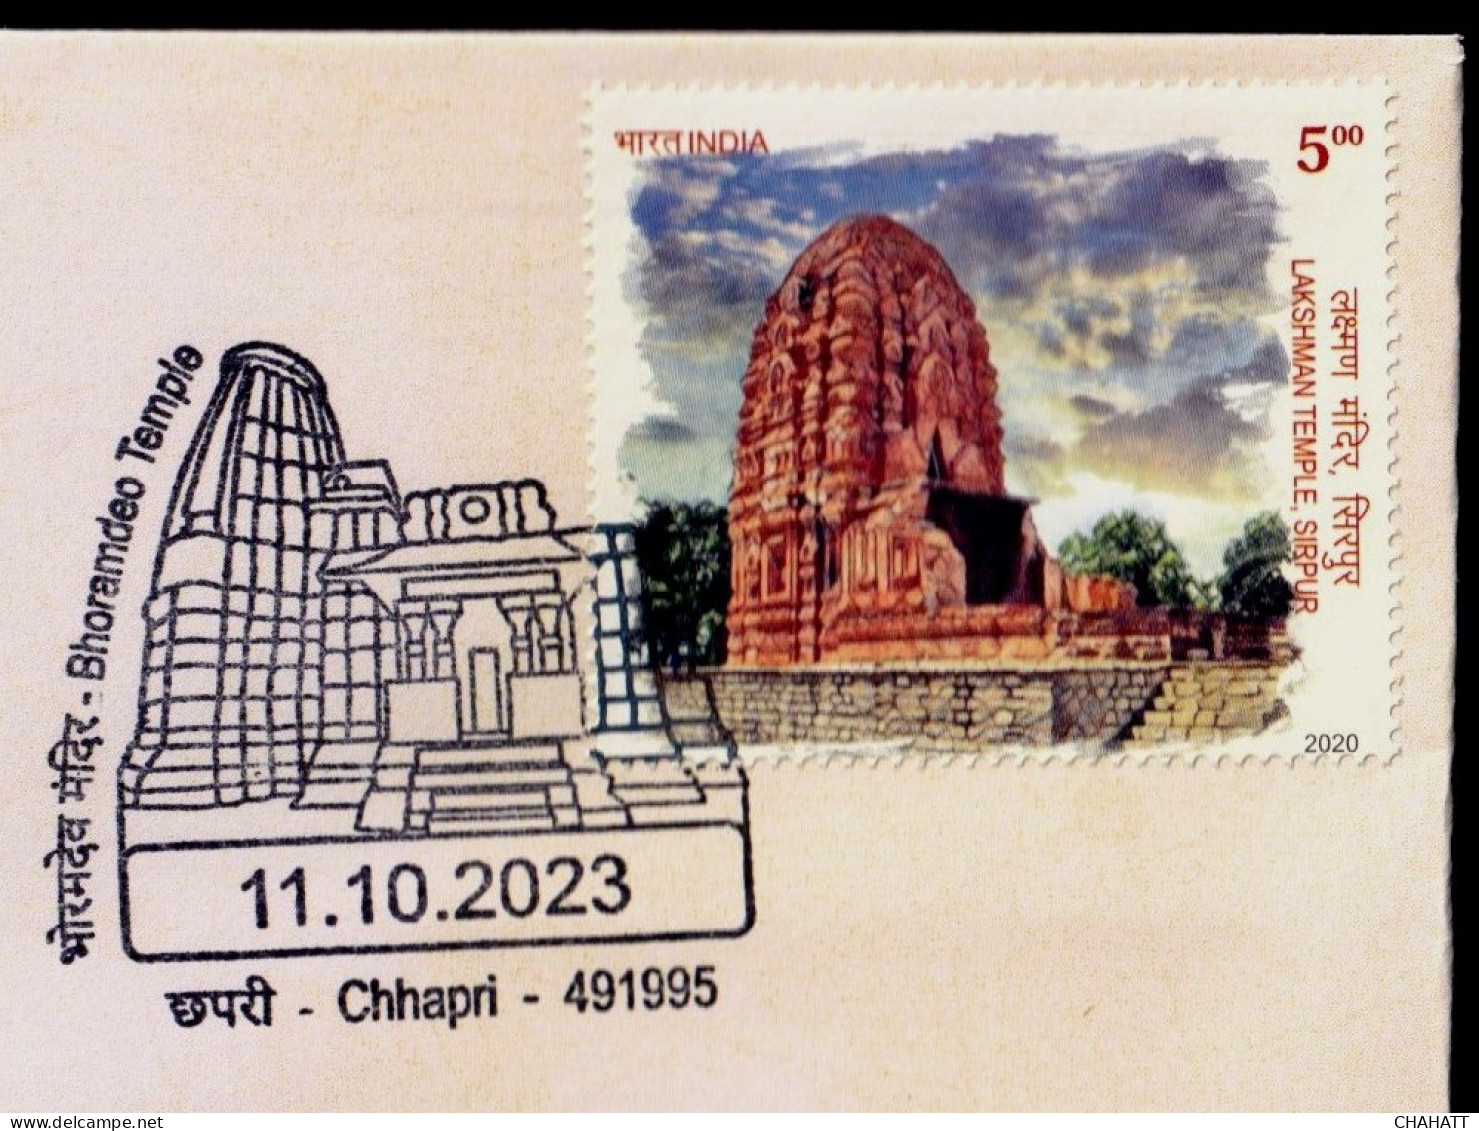 HINDUISM- BHORAMDEO TEMPLE- PERMANENT CACHET- INDIA POST, RAIPUR GPO-CG CIRCLE-LIMITED ISSUE-BX4-29 - Hinduismus